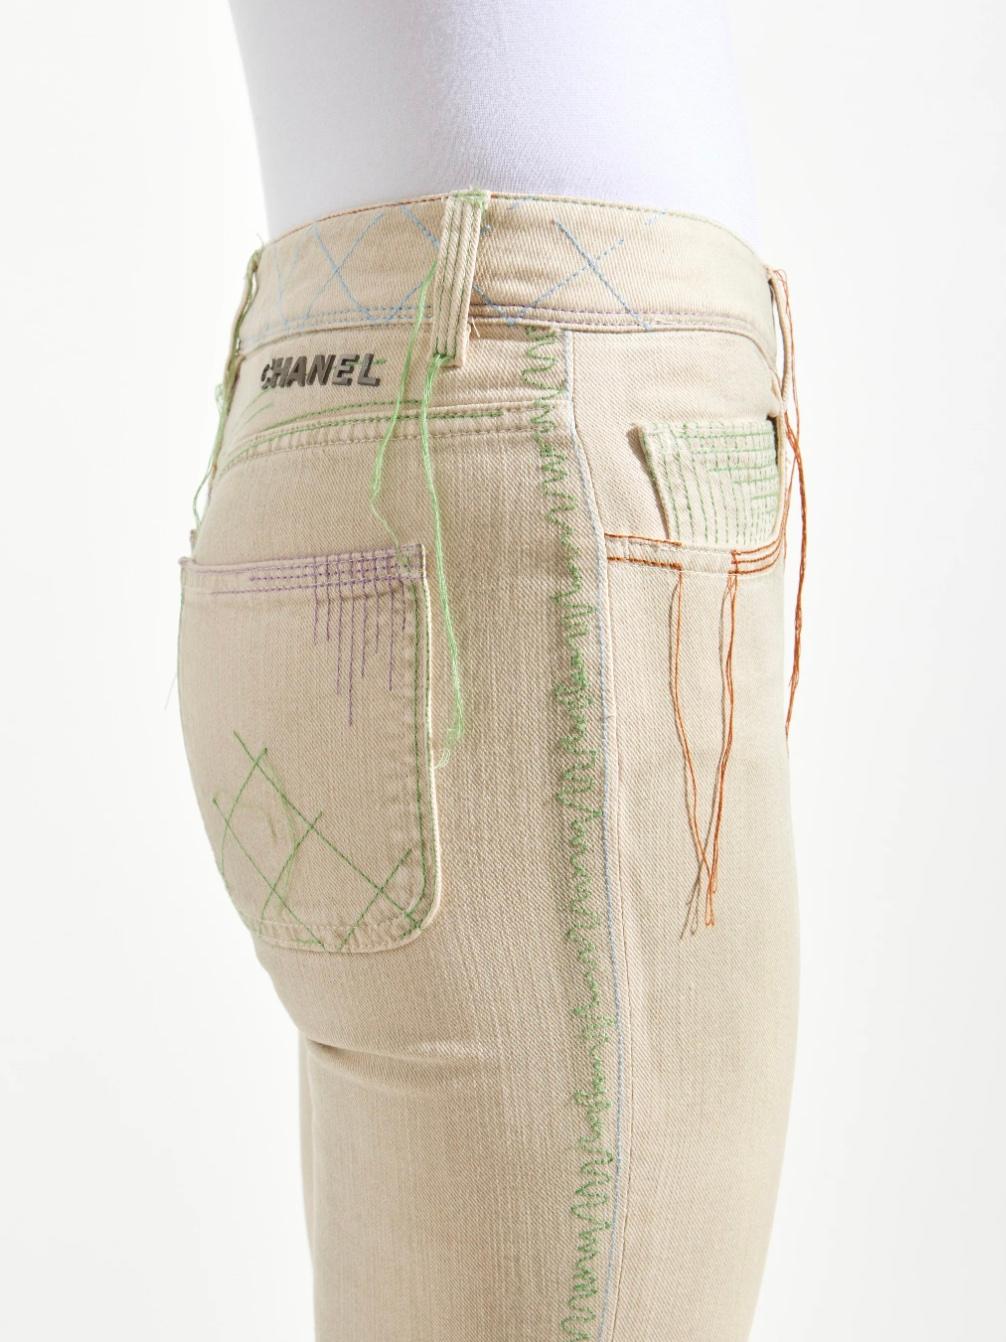 Chanel Jeans In Excellent Condition For Sale In New York, NY